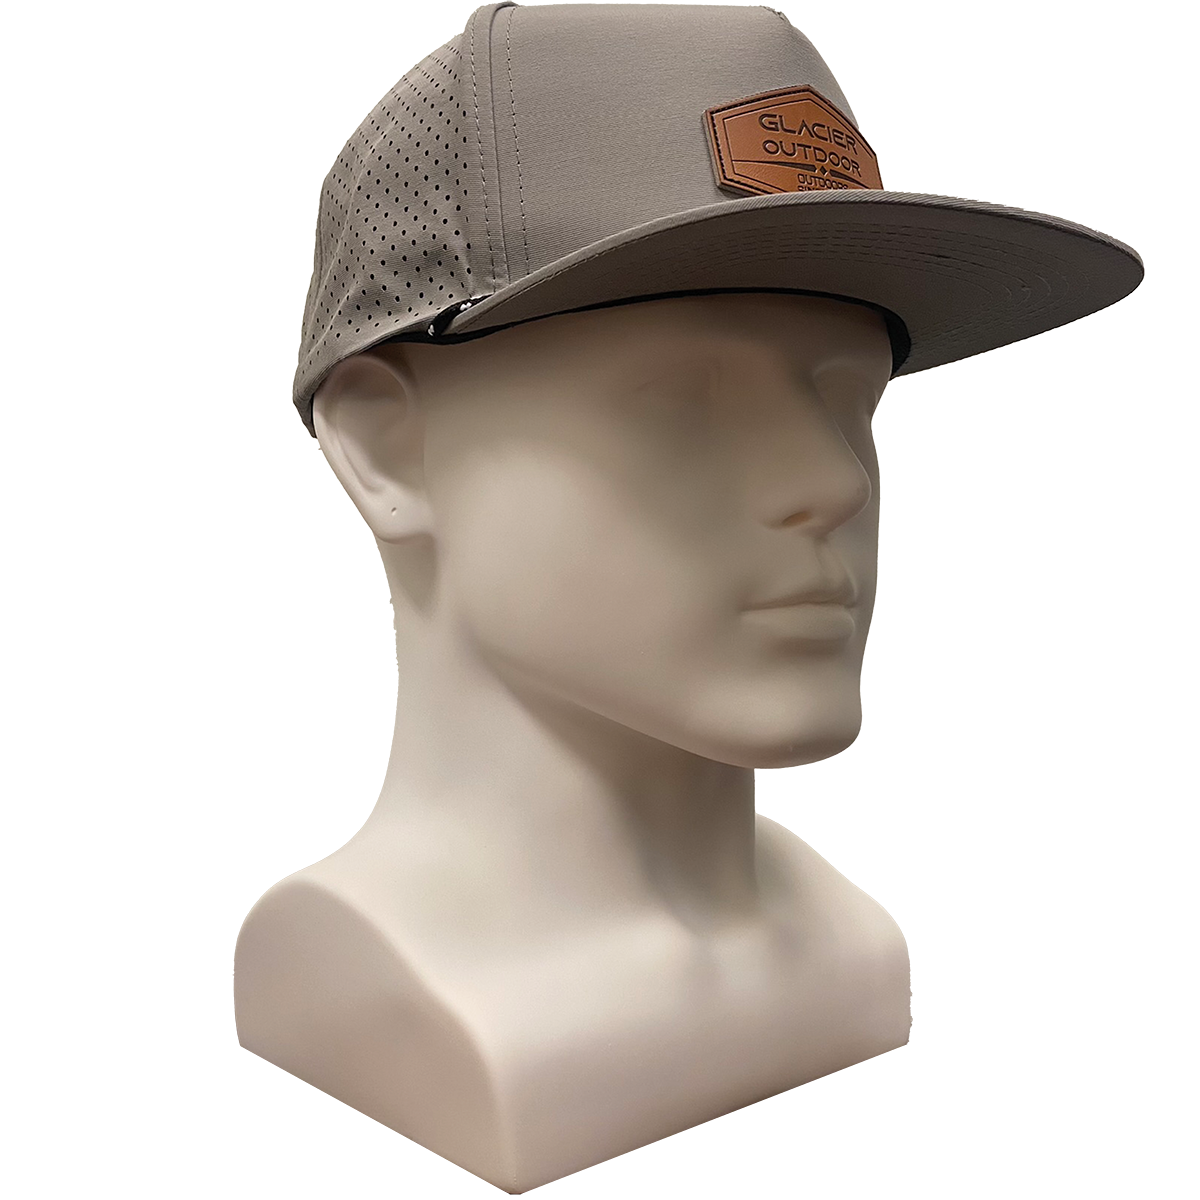 Glacier Outdoor Kingston Snap Back Hat in quick-dry grey